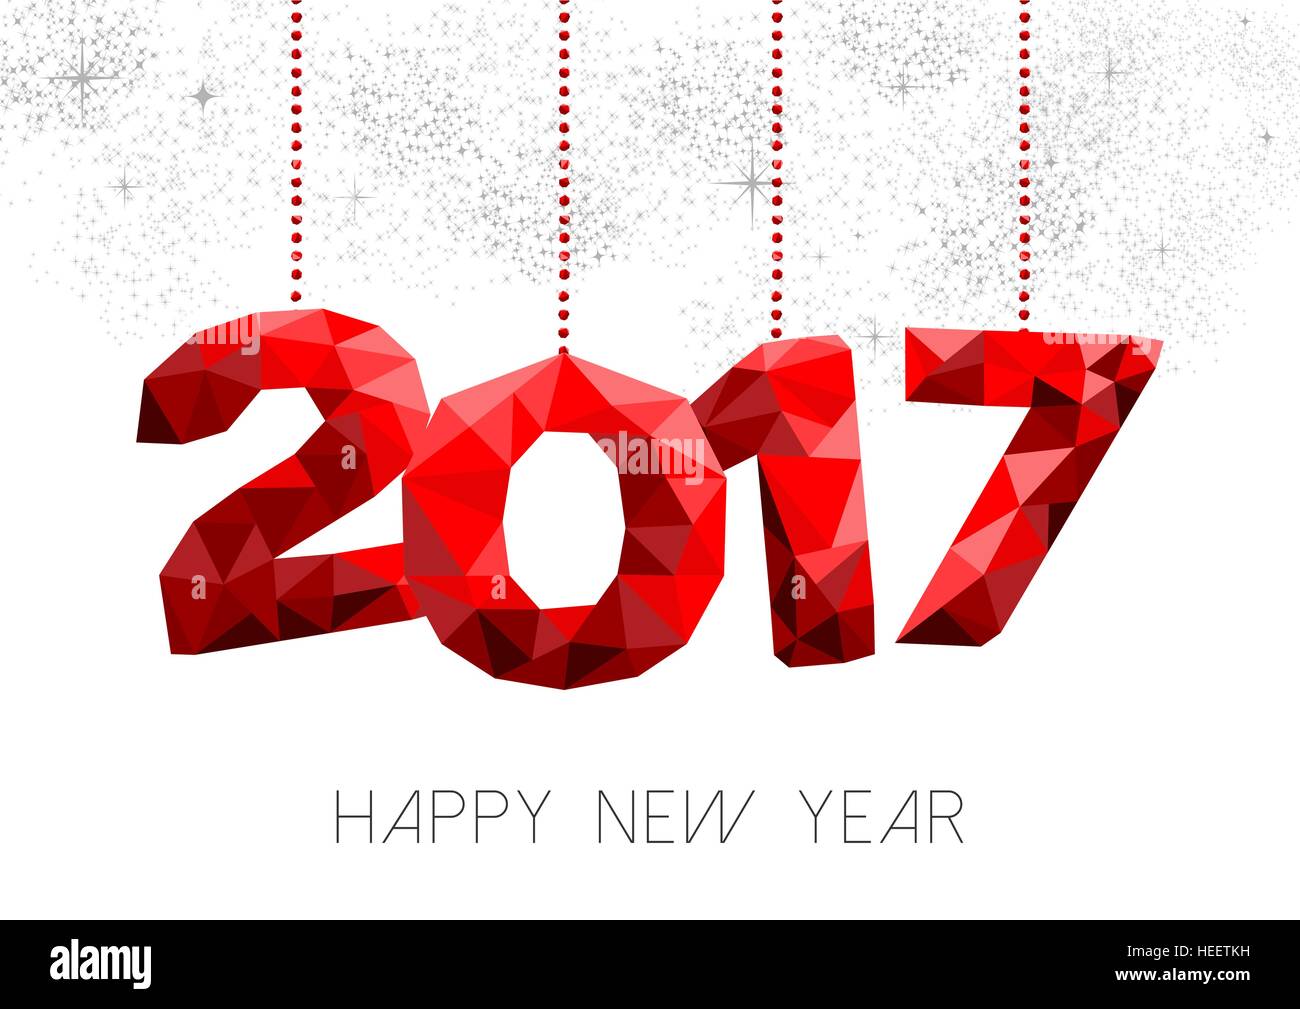 New year 2017 red holiday typography illustration design, low poly decoration on fireworks sky. EPS10 vector. Stock Vector